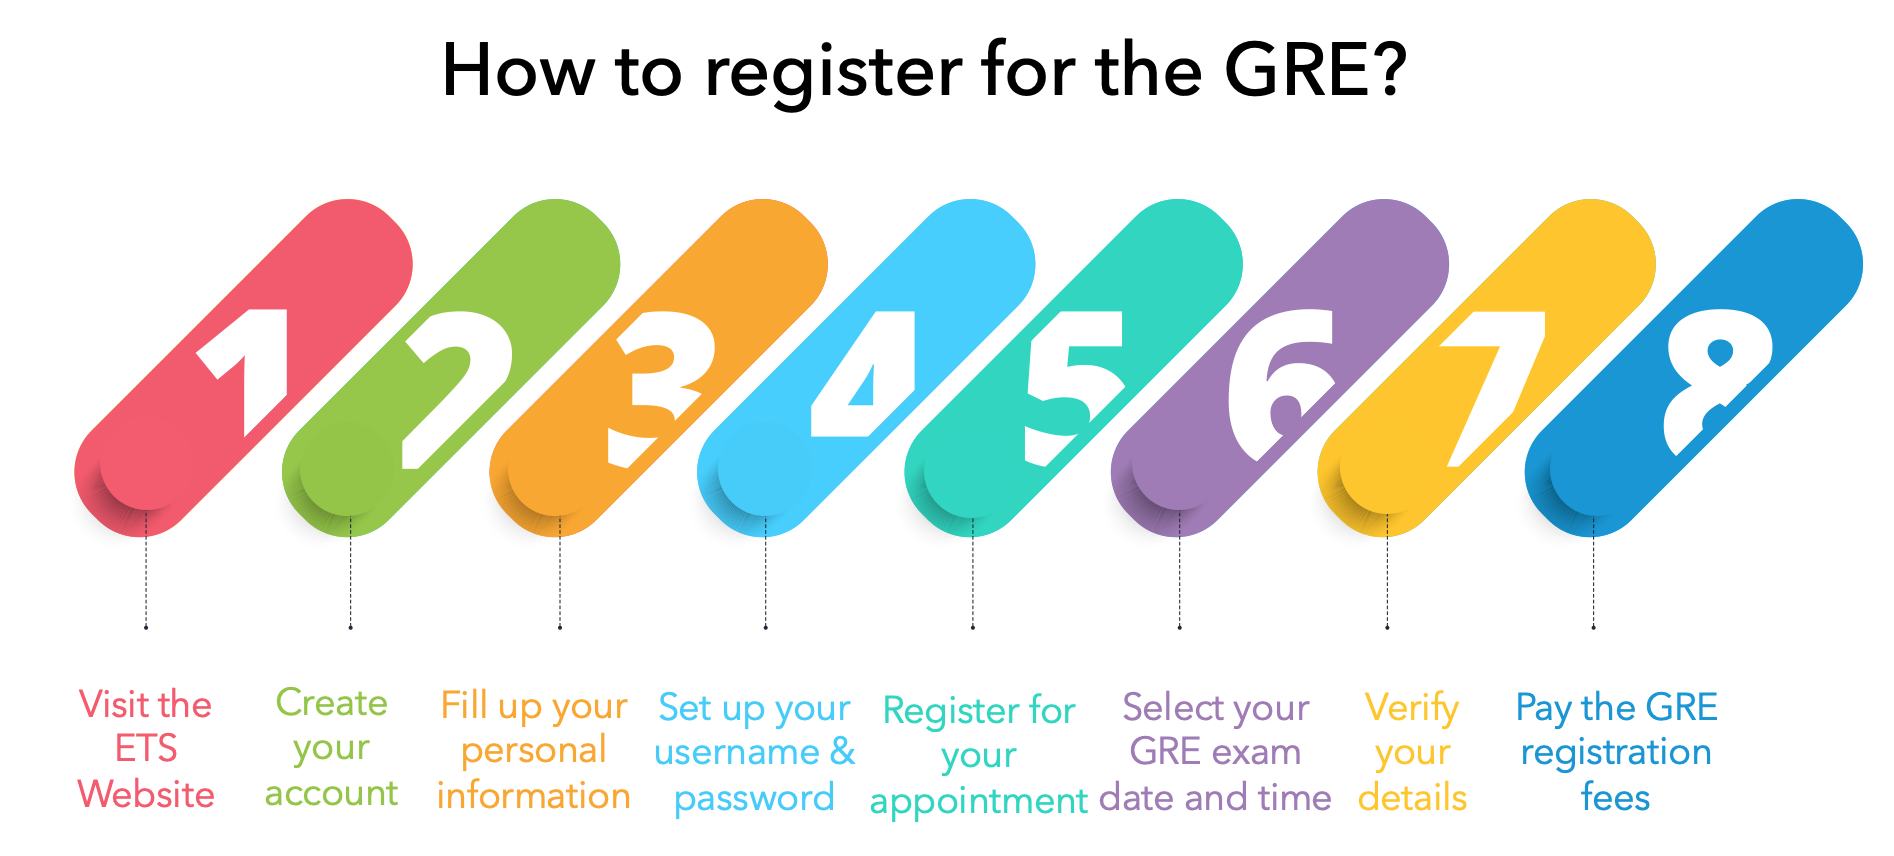 How to register for the GRE in 8 steps? (Explained with pictures)